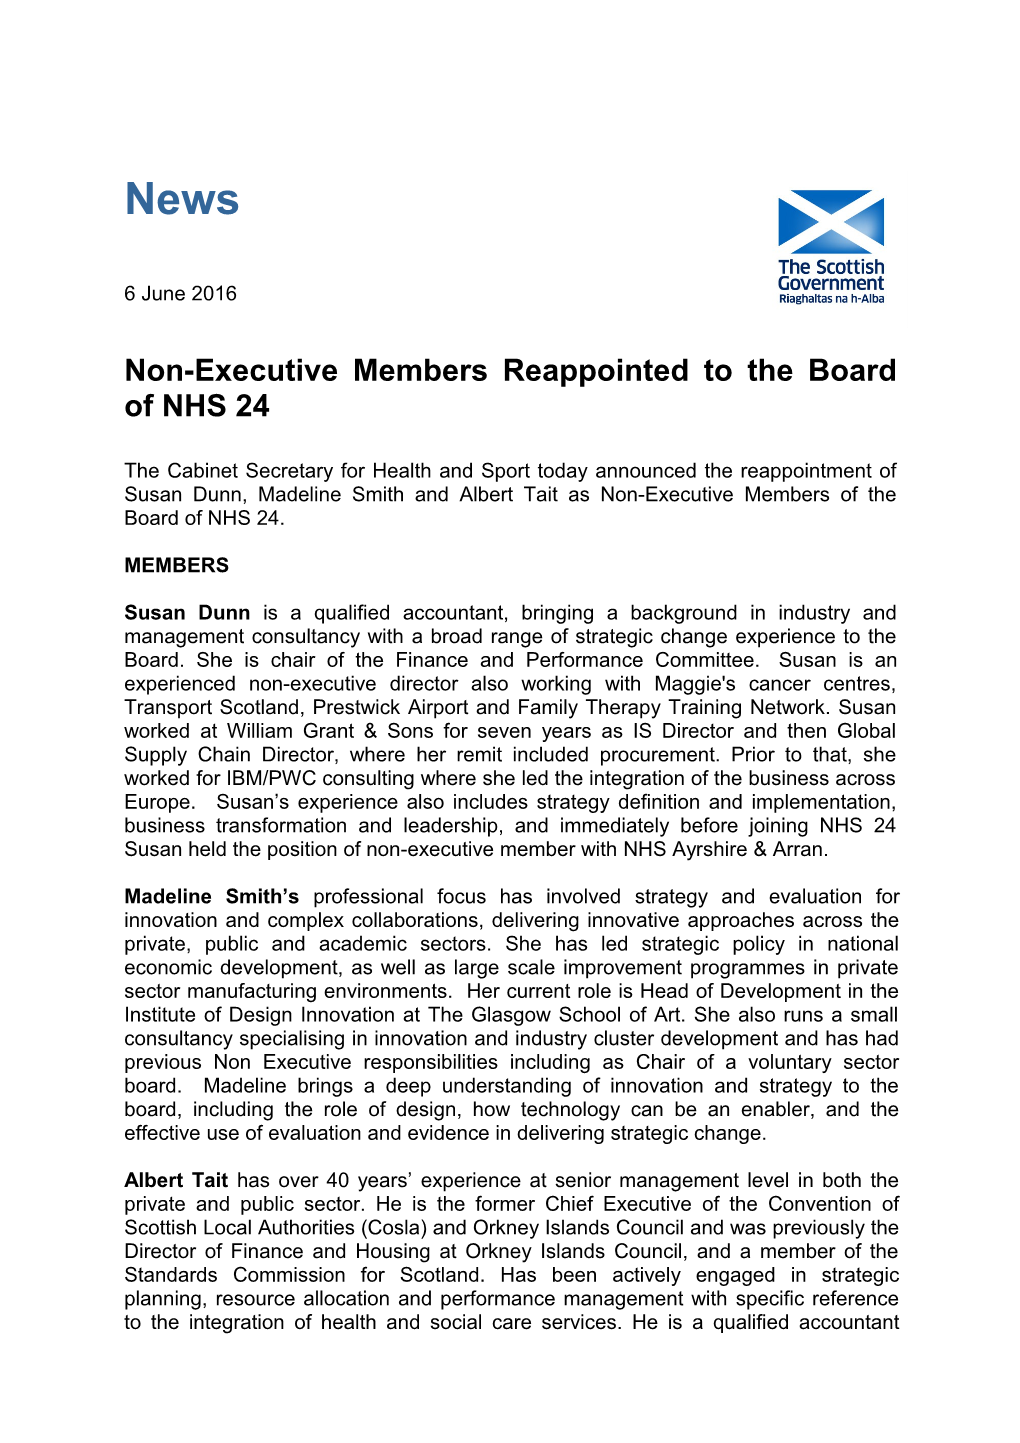 Non-Executive Members Reappointed to the Board of NHS 24